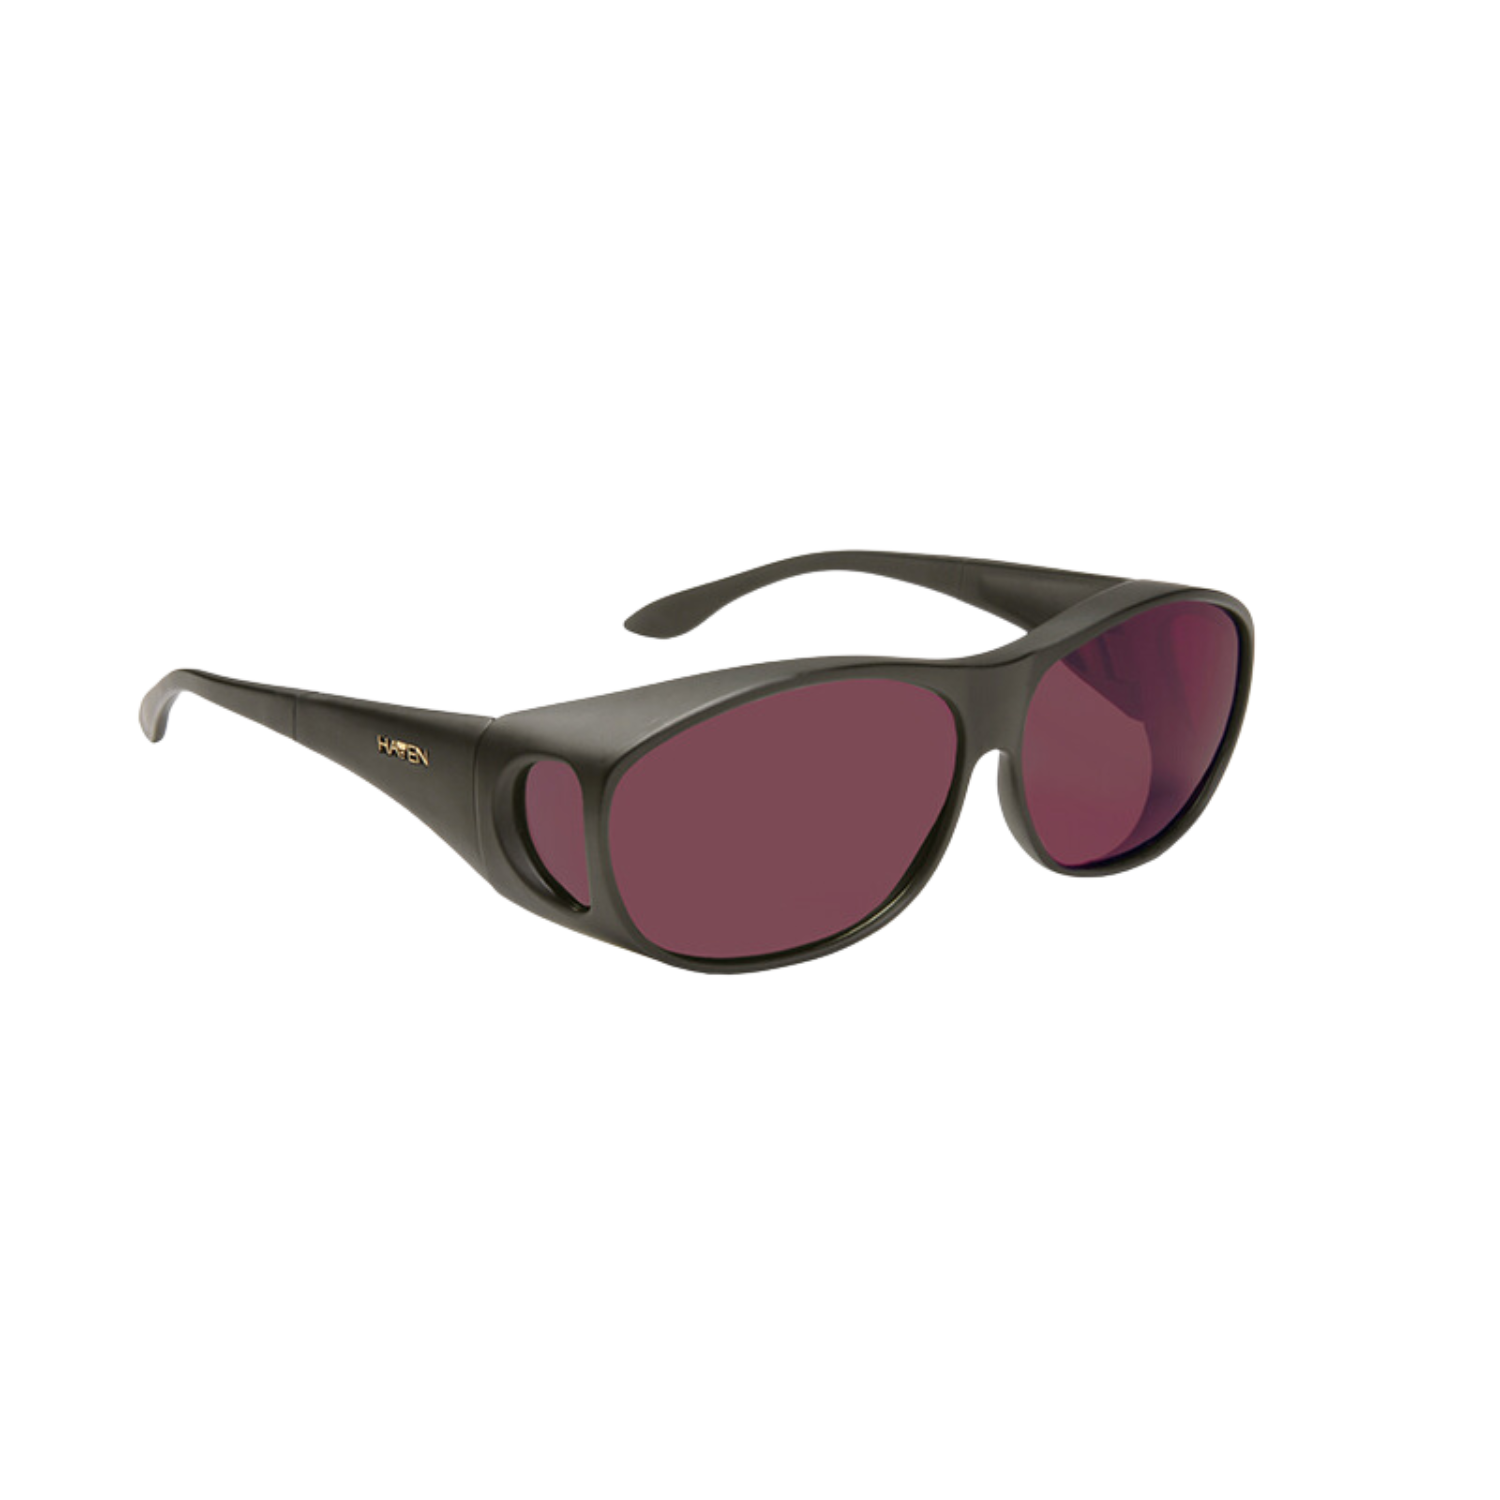 Image of the Maven Meridian FL-41 Glases with  medium black frames and dark rose tint from Eschenbach.